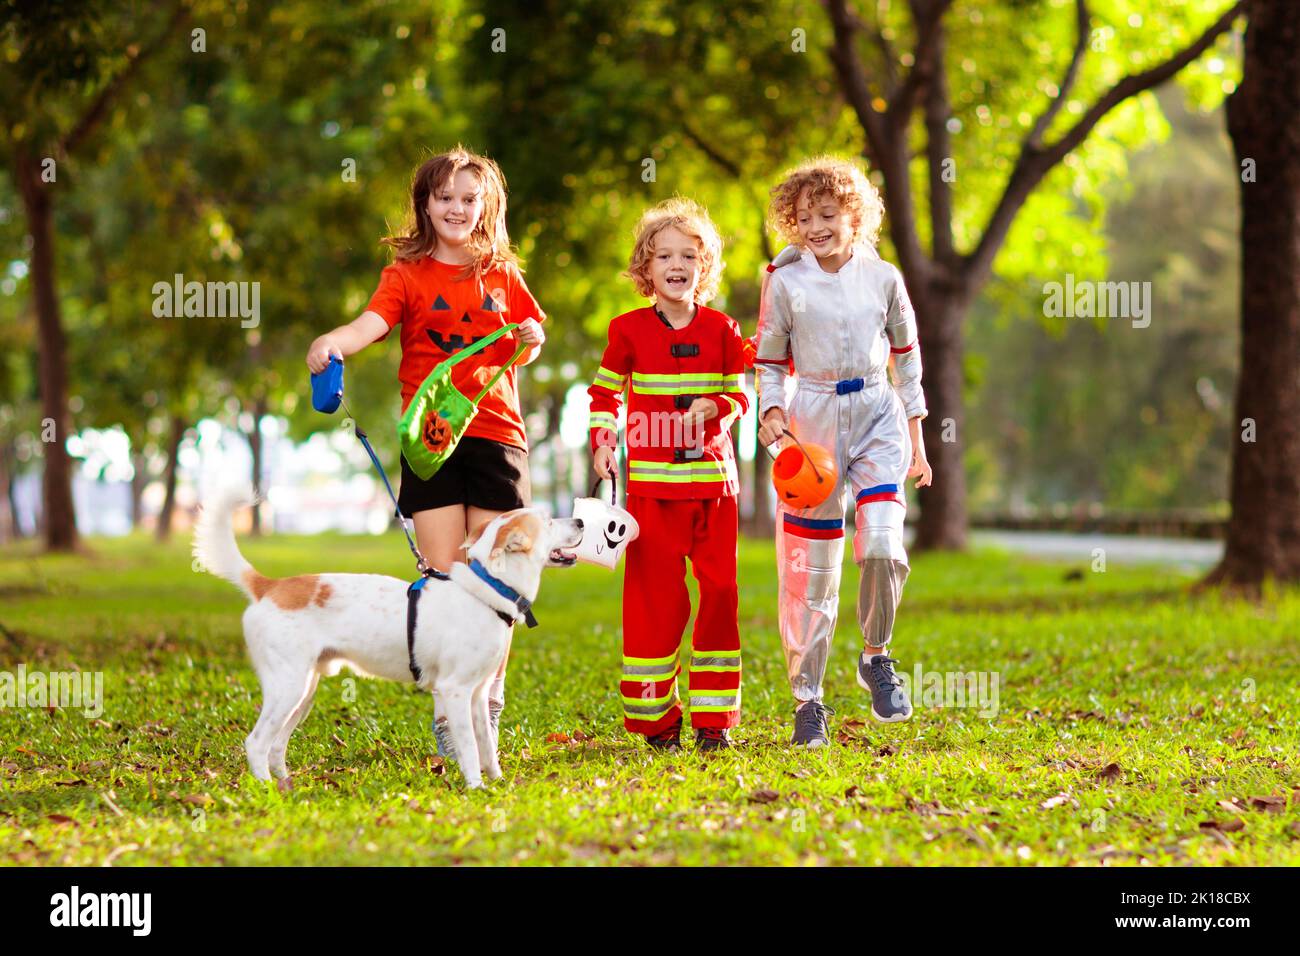 Kids trick or treat in Halloween costume. Children in colorful dress up with candy bucket on suburban street. Little boy and girl trick or treating wi Stock Photo